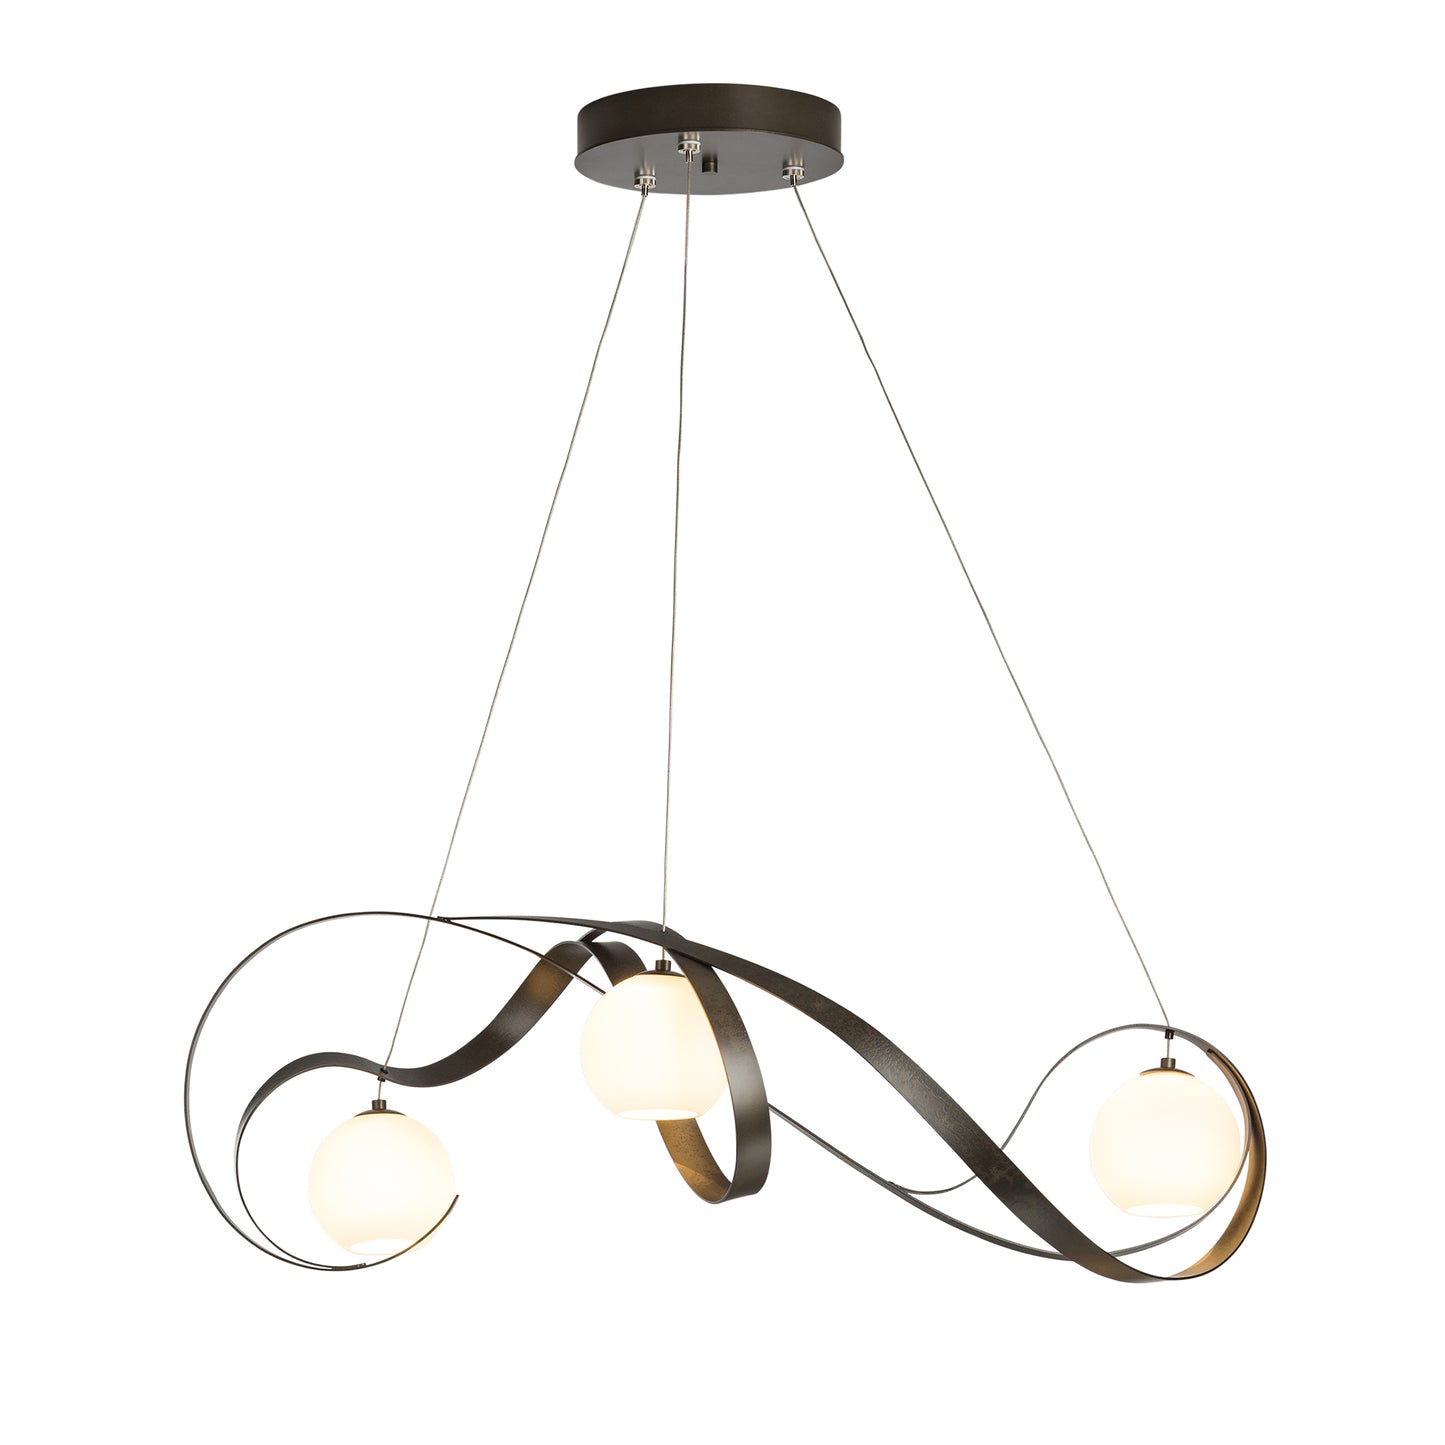 Handcrafted Karma Pendant, featuring a swirl design, from Hubbardton Forge lighting.